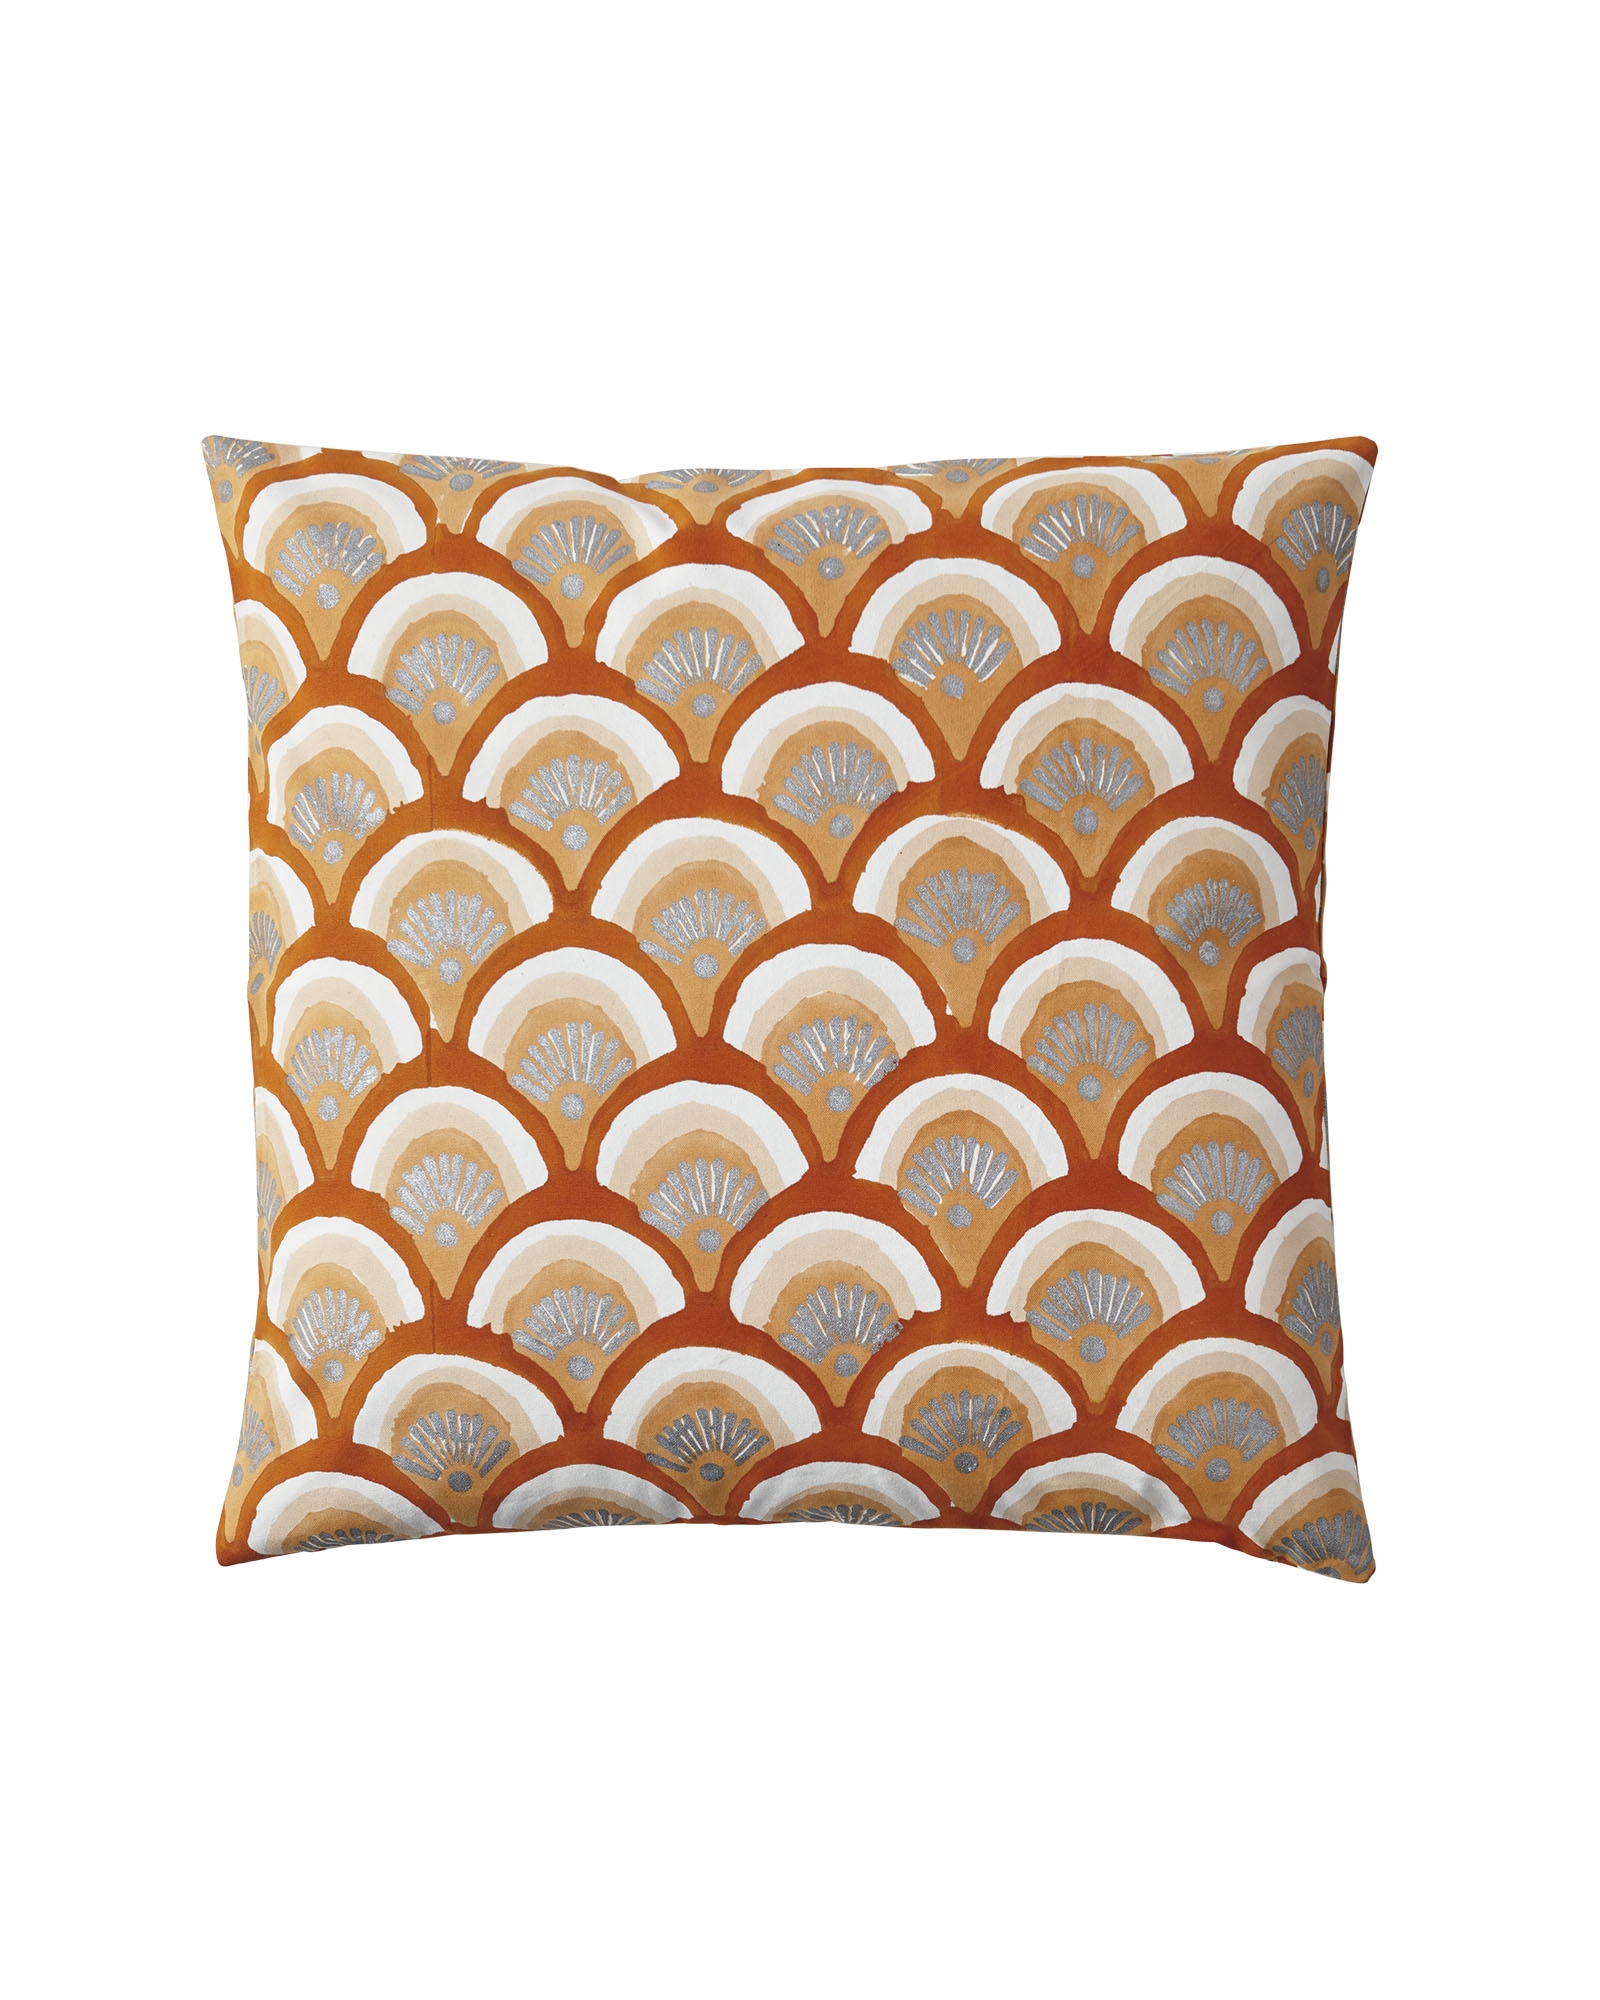 Kyoto Pillow Covers - Saffron-20x20-Insert sold separately - Image 0